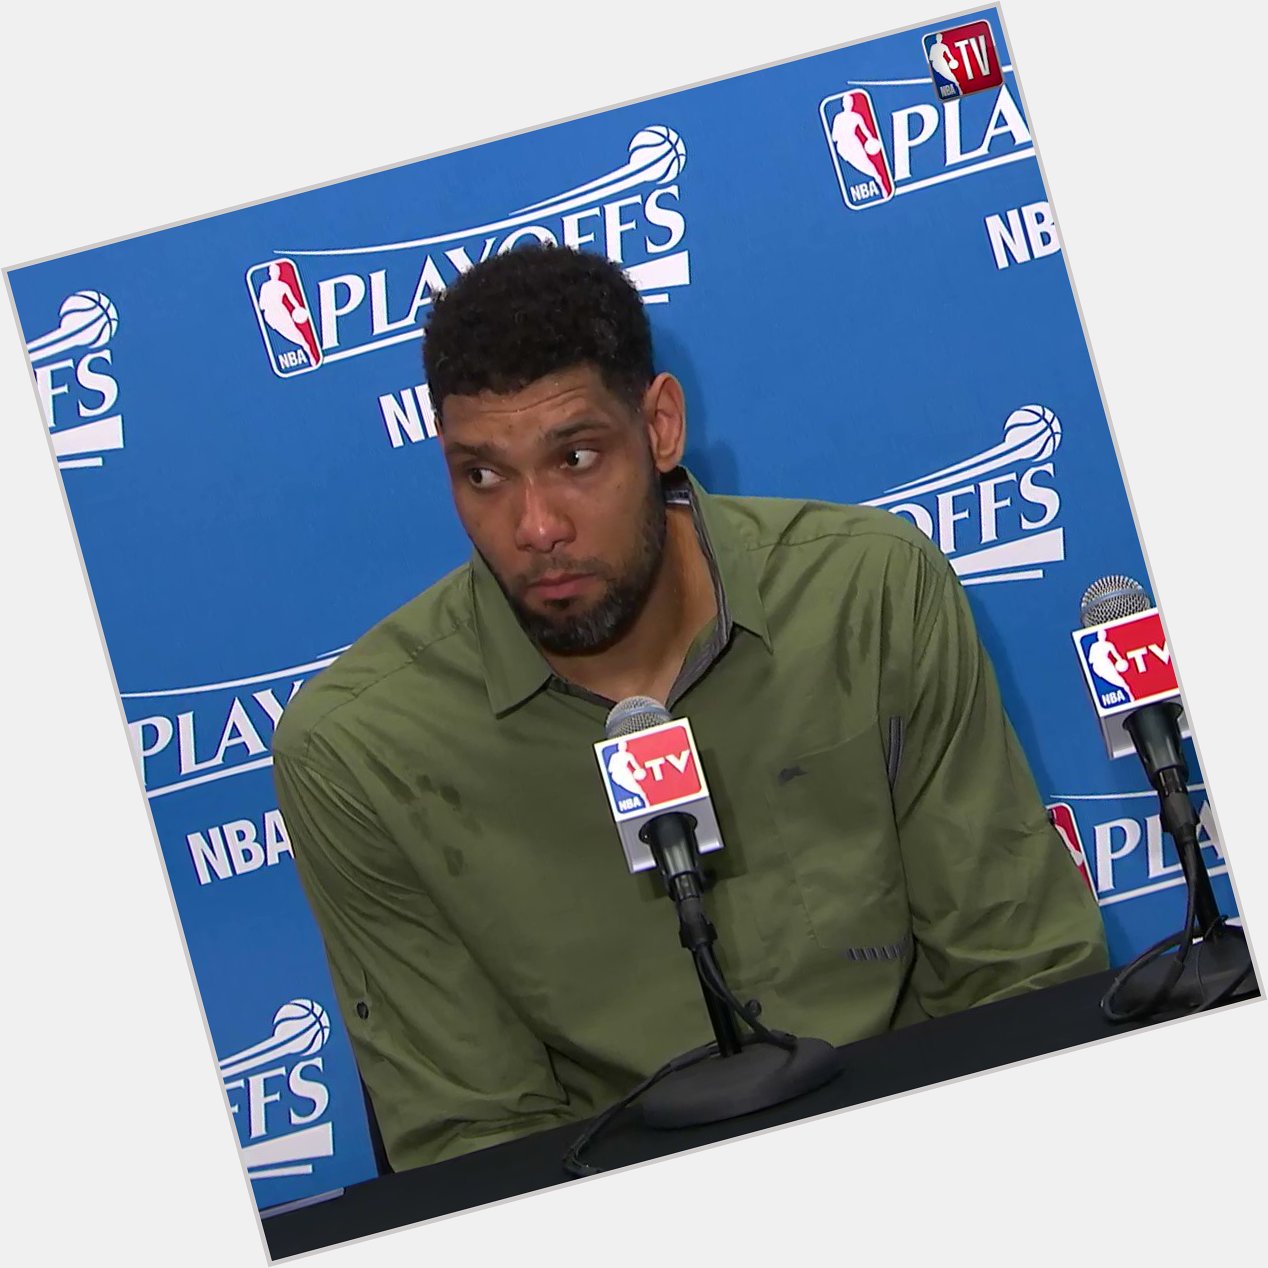 At least once a week, I think about how much Tim Duncan hates birthdays. 

Happy 44th birthday, Tim 